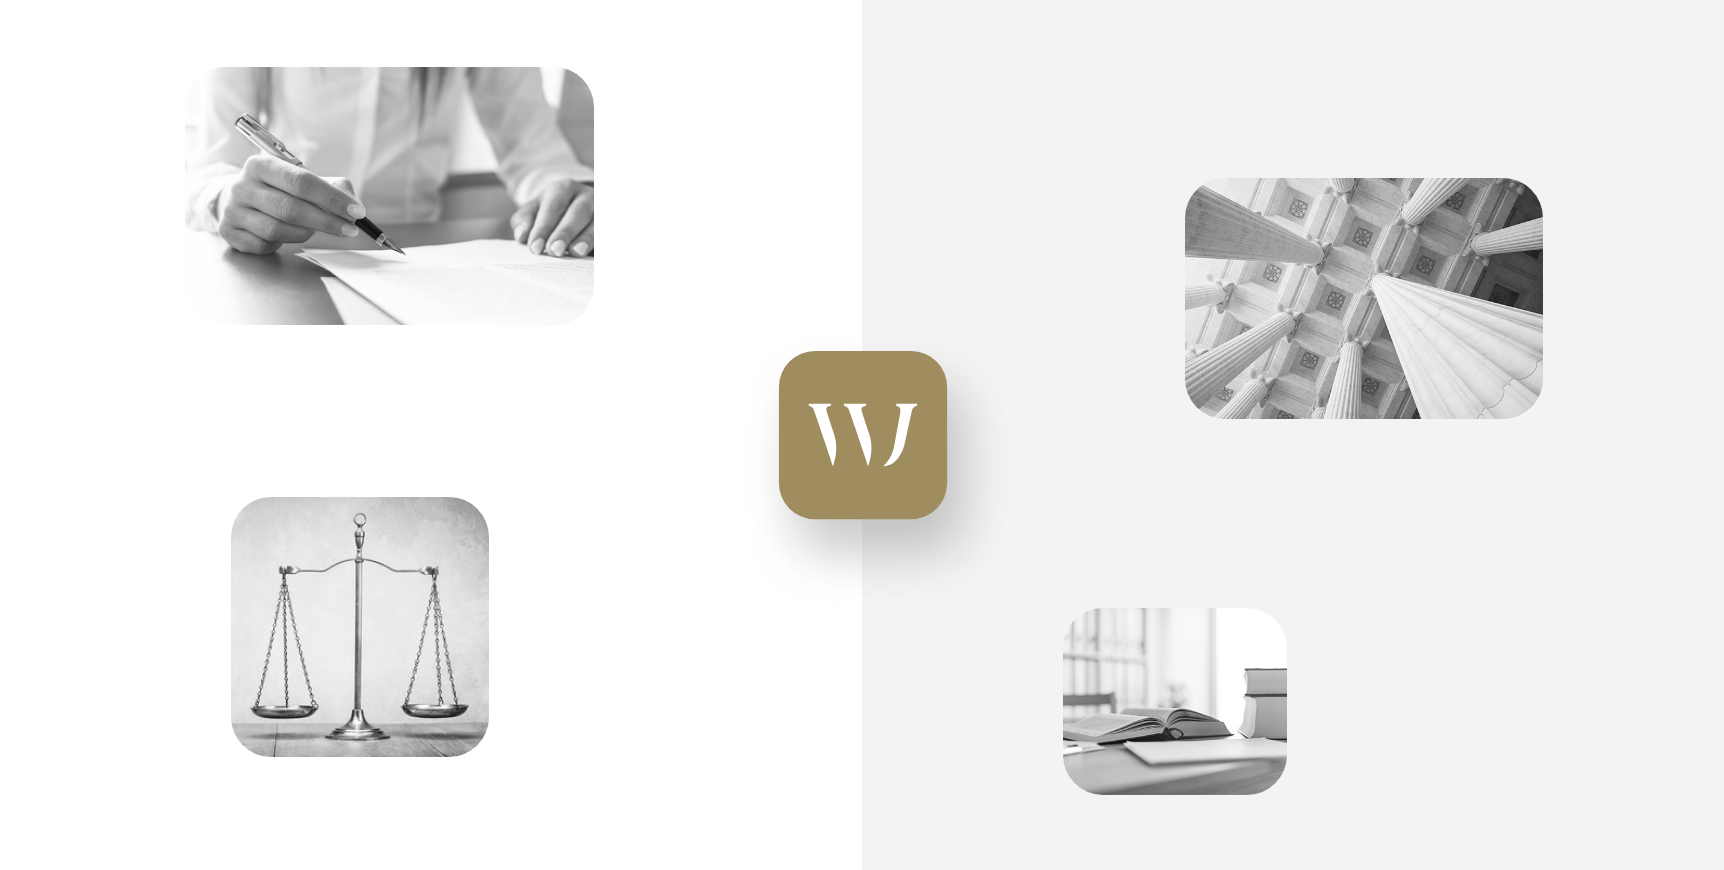 Golden WJ logo surrounded by legal stock images for law firm WJ